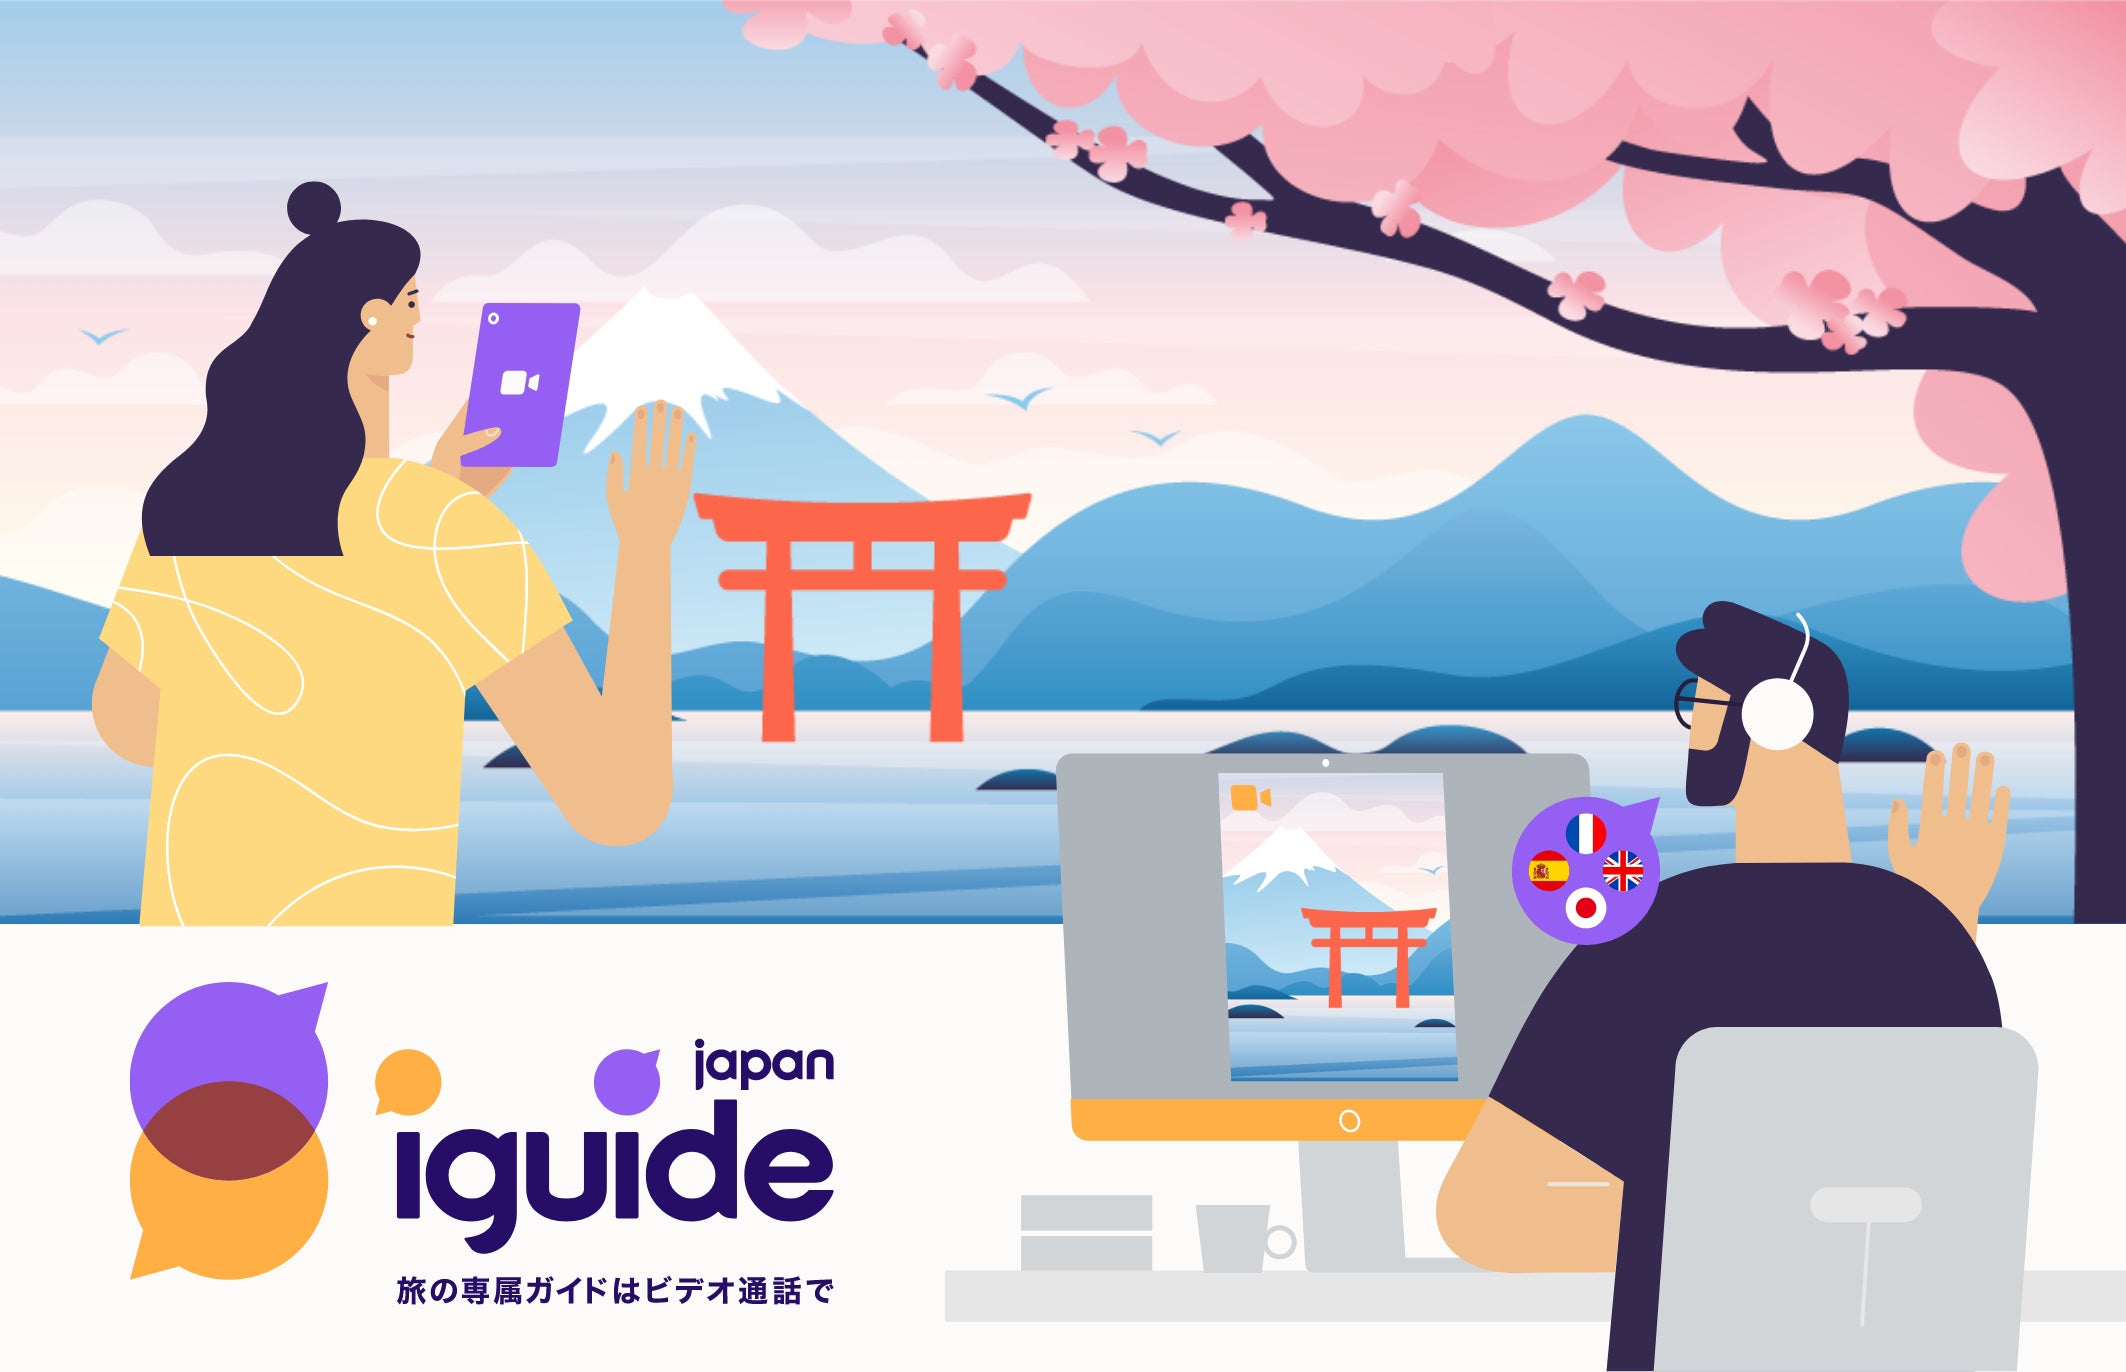 iguide Japan | Your personal video-call travel guide